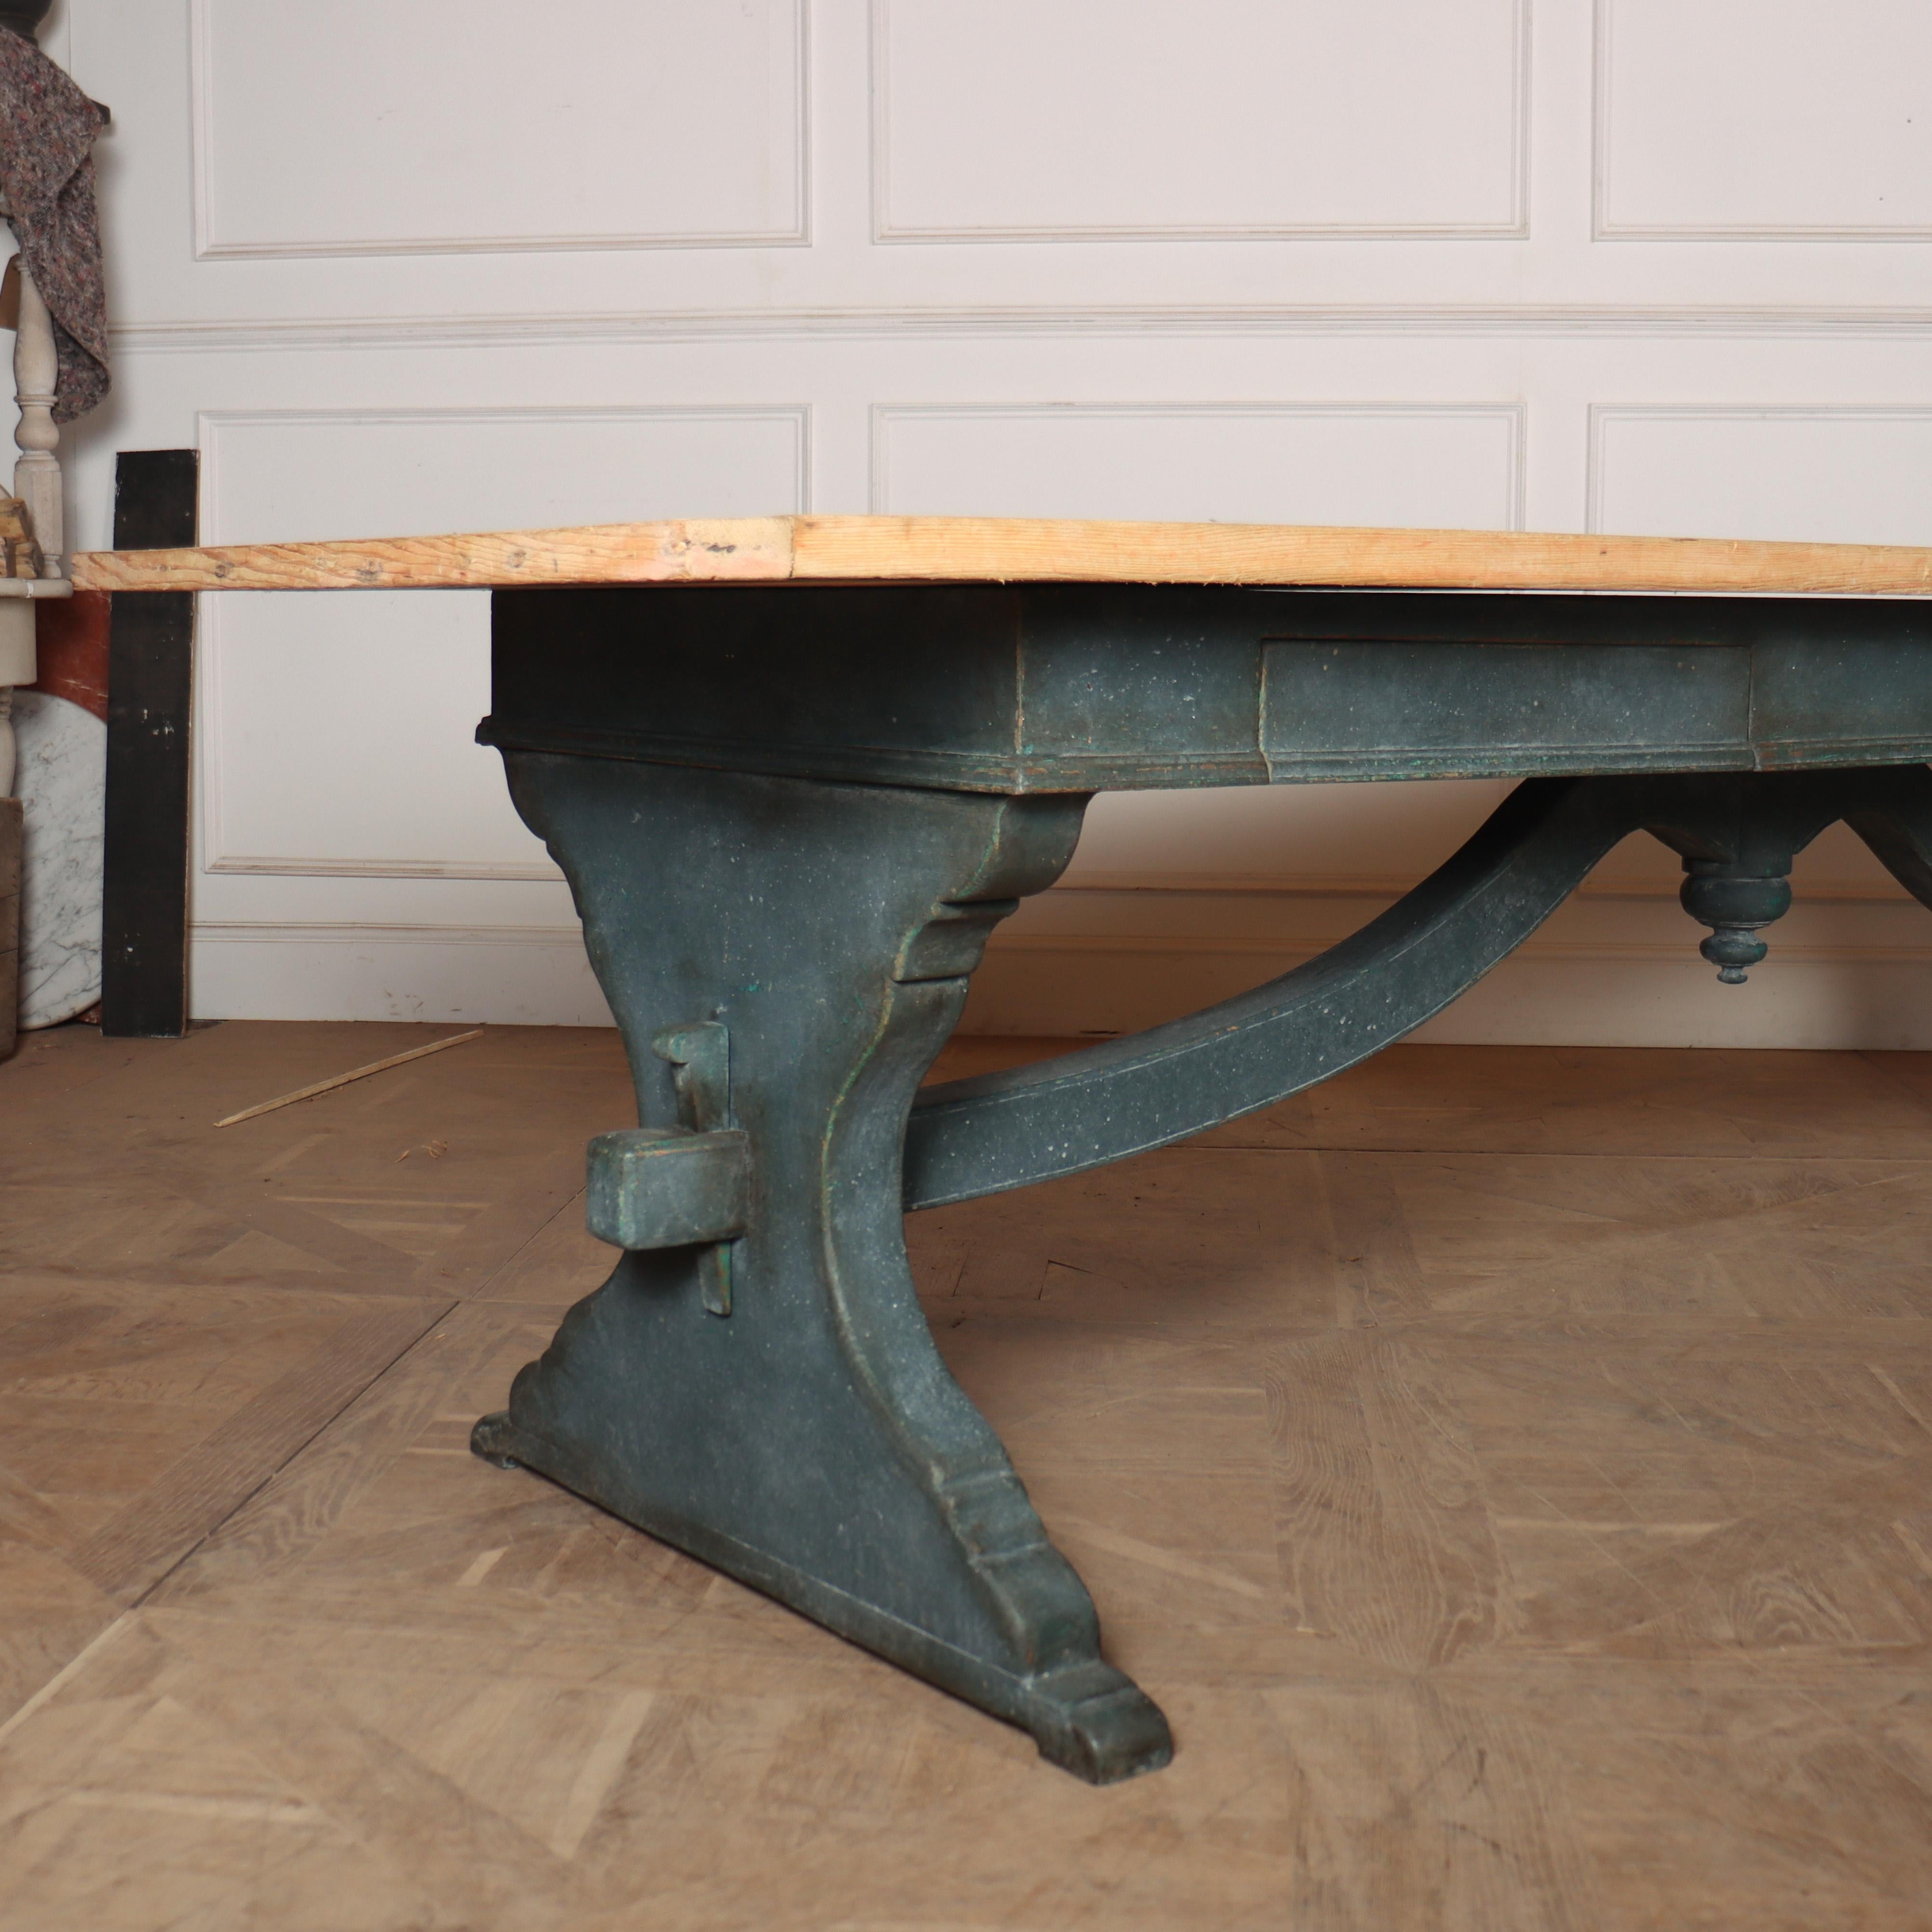 Early 19th C Italian painted trestle table with a scrubbed pine top and a pretty shaped stretcher. 1840.

Reference: 8303

Dimensions
115 inches (292 cms) Wide
37 inches (94 cms) Deep
30 inches (76 cms) High